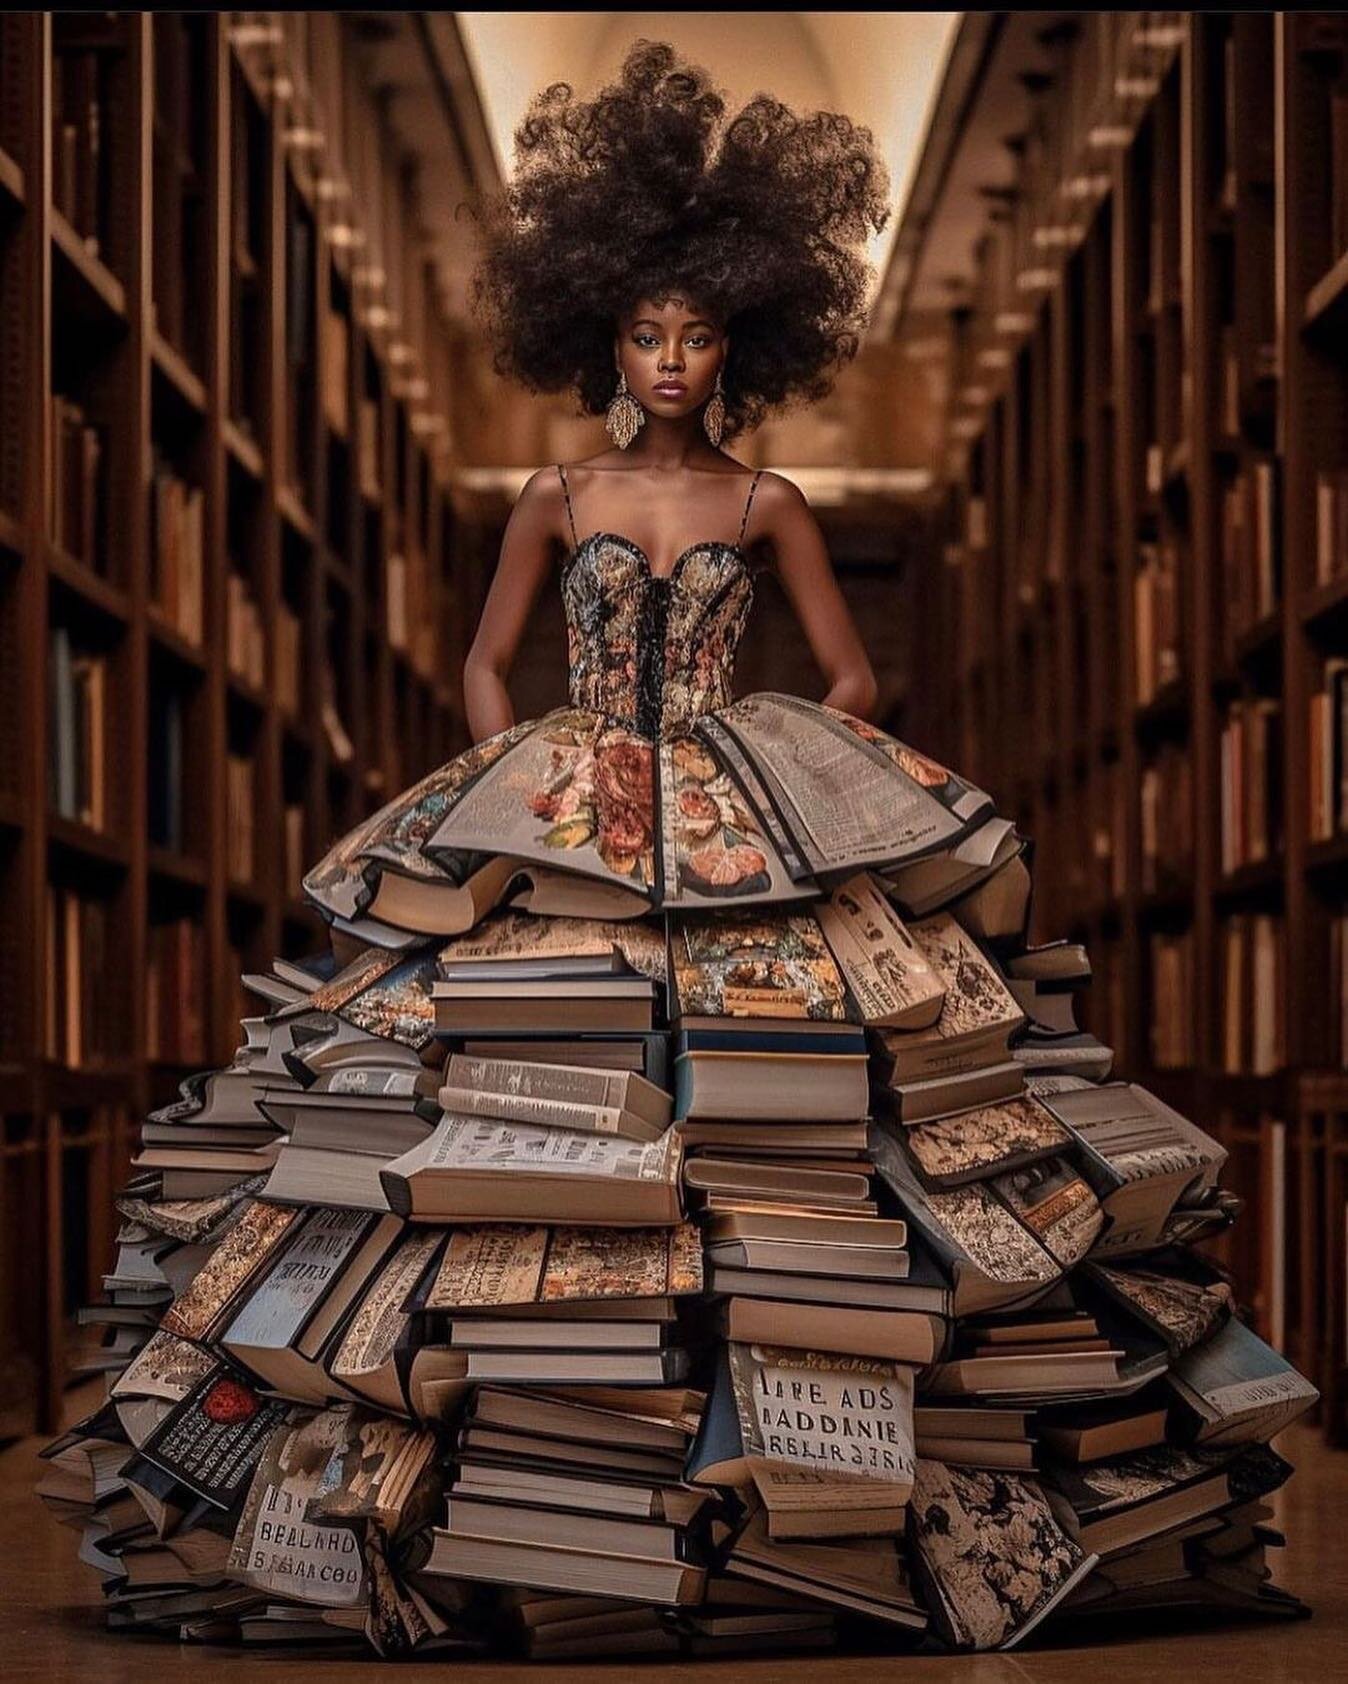 Books, Books, and more Books!

#gorgeous 
#diverseluv